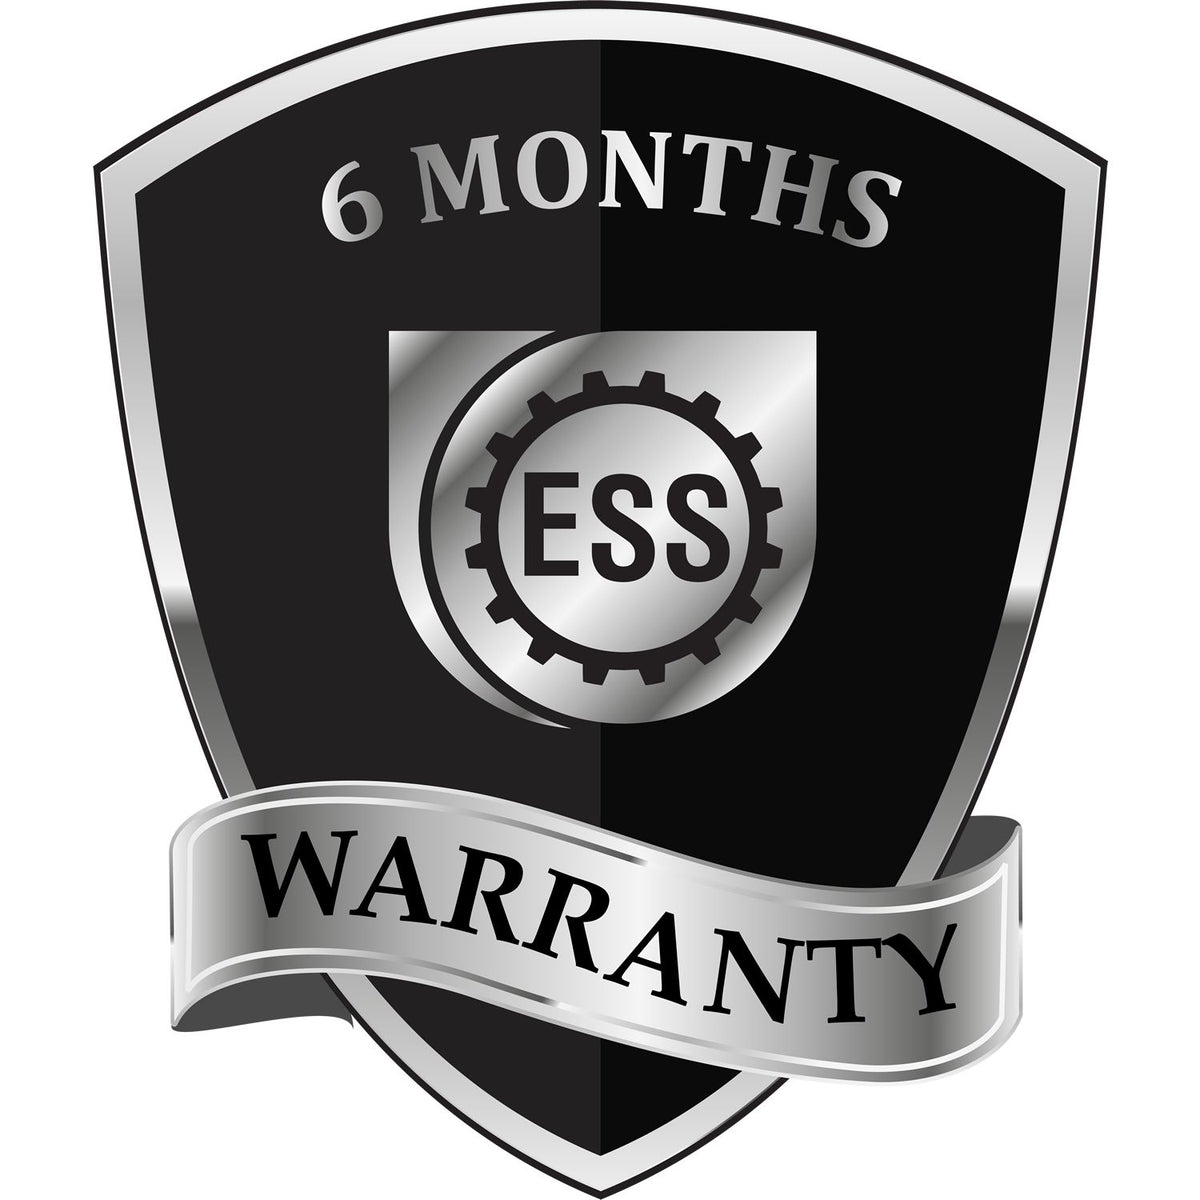 A black and silver badge or emblem showing warranty information for the New Hampshire Professional Geologist Seal Stamp